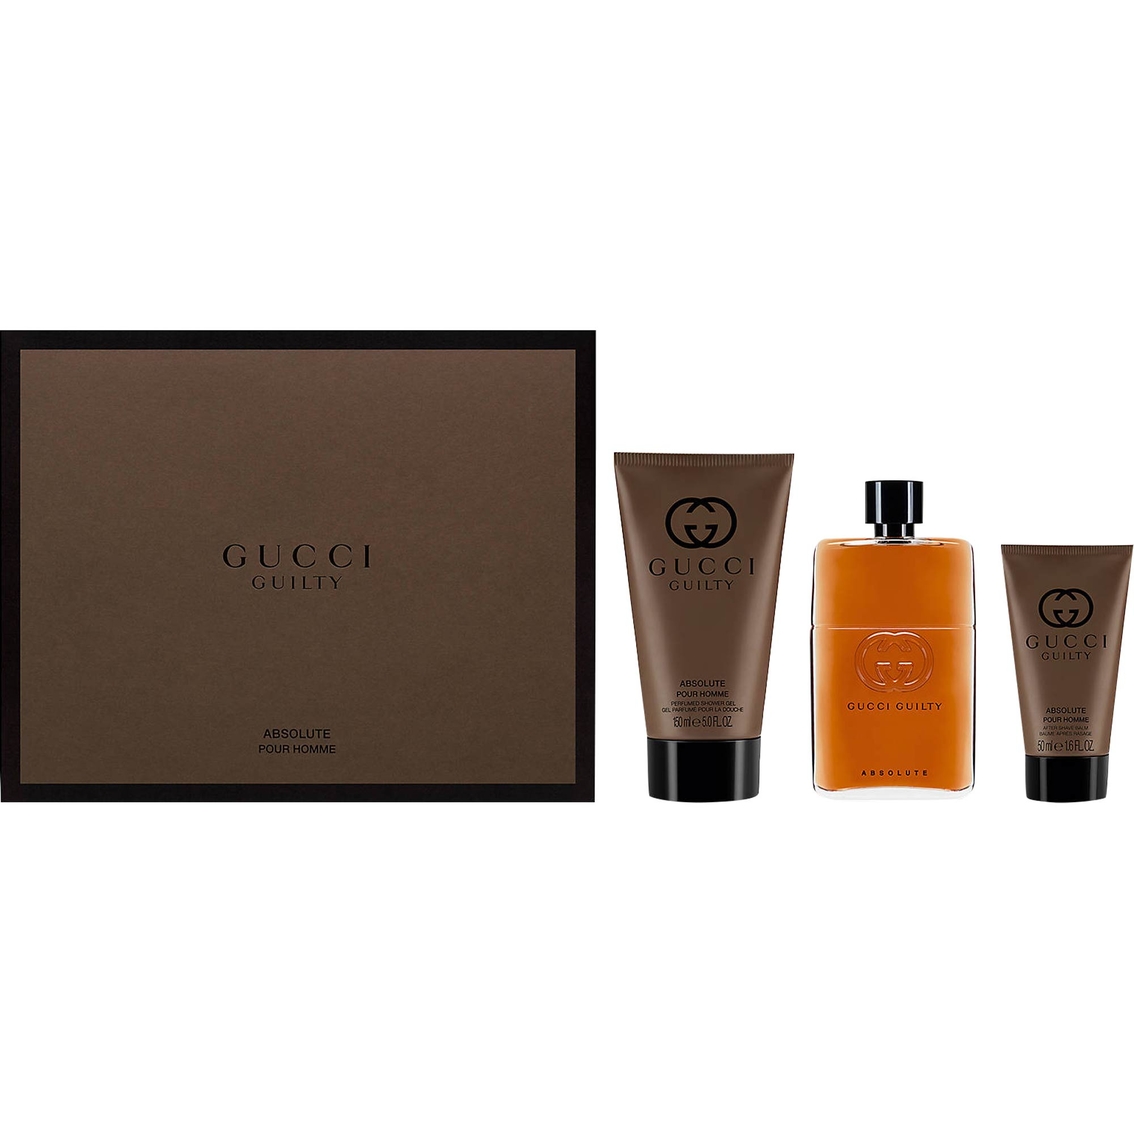 Gucci Guilty Absolute Pour Homme 3 Pc. Gift Set | Gifts Sets For Him ...